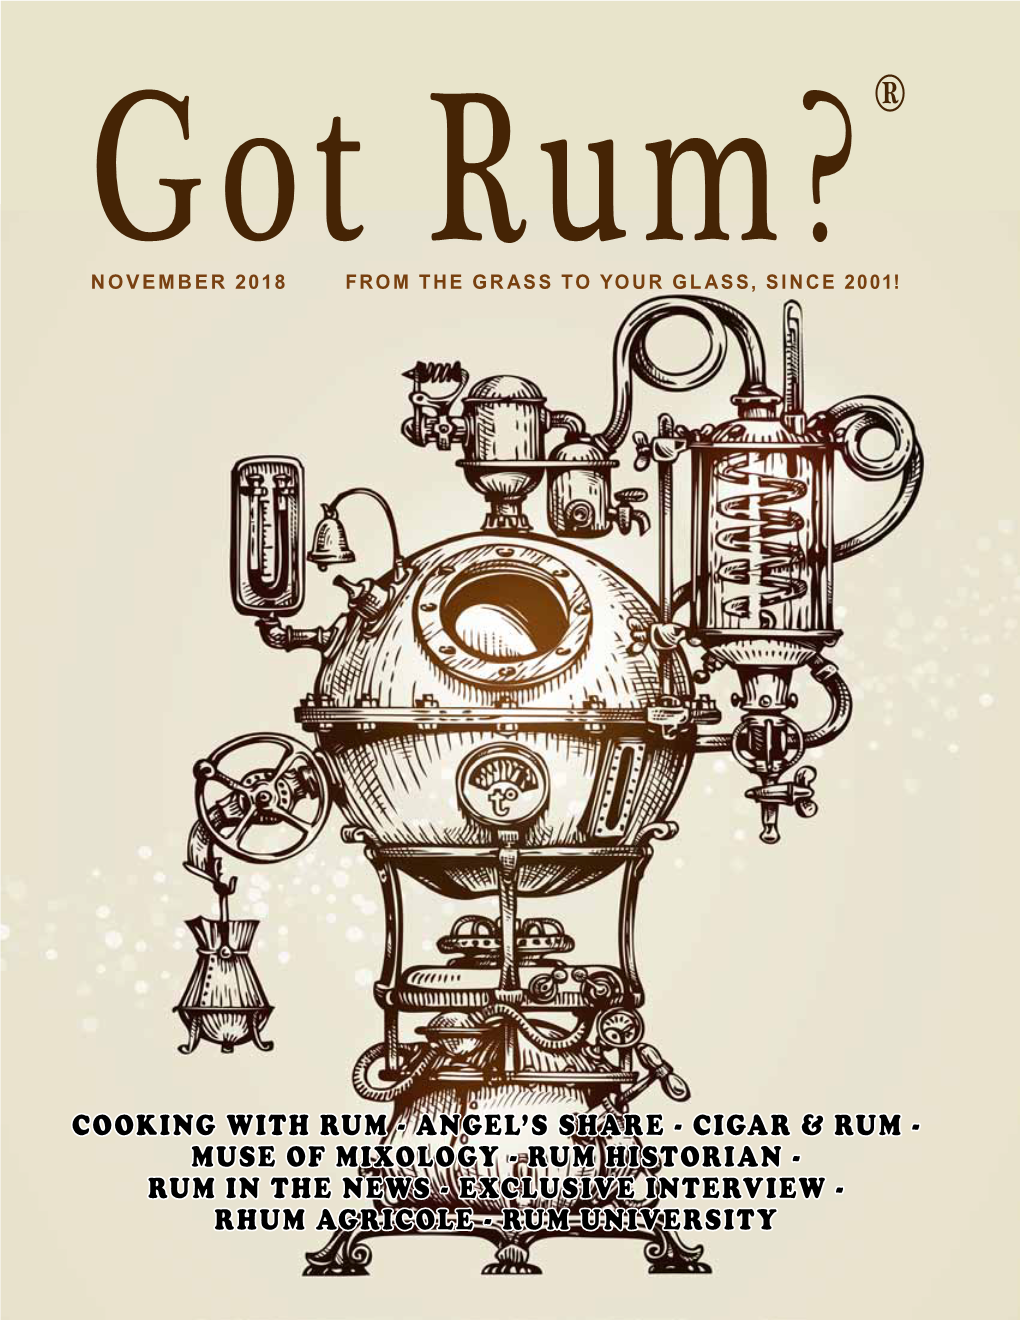 Muse of Mixology - Rum Historian - Rum in the News - Exclusive Interview - Rhum Agricole - Rum University 6